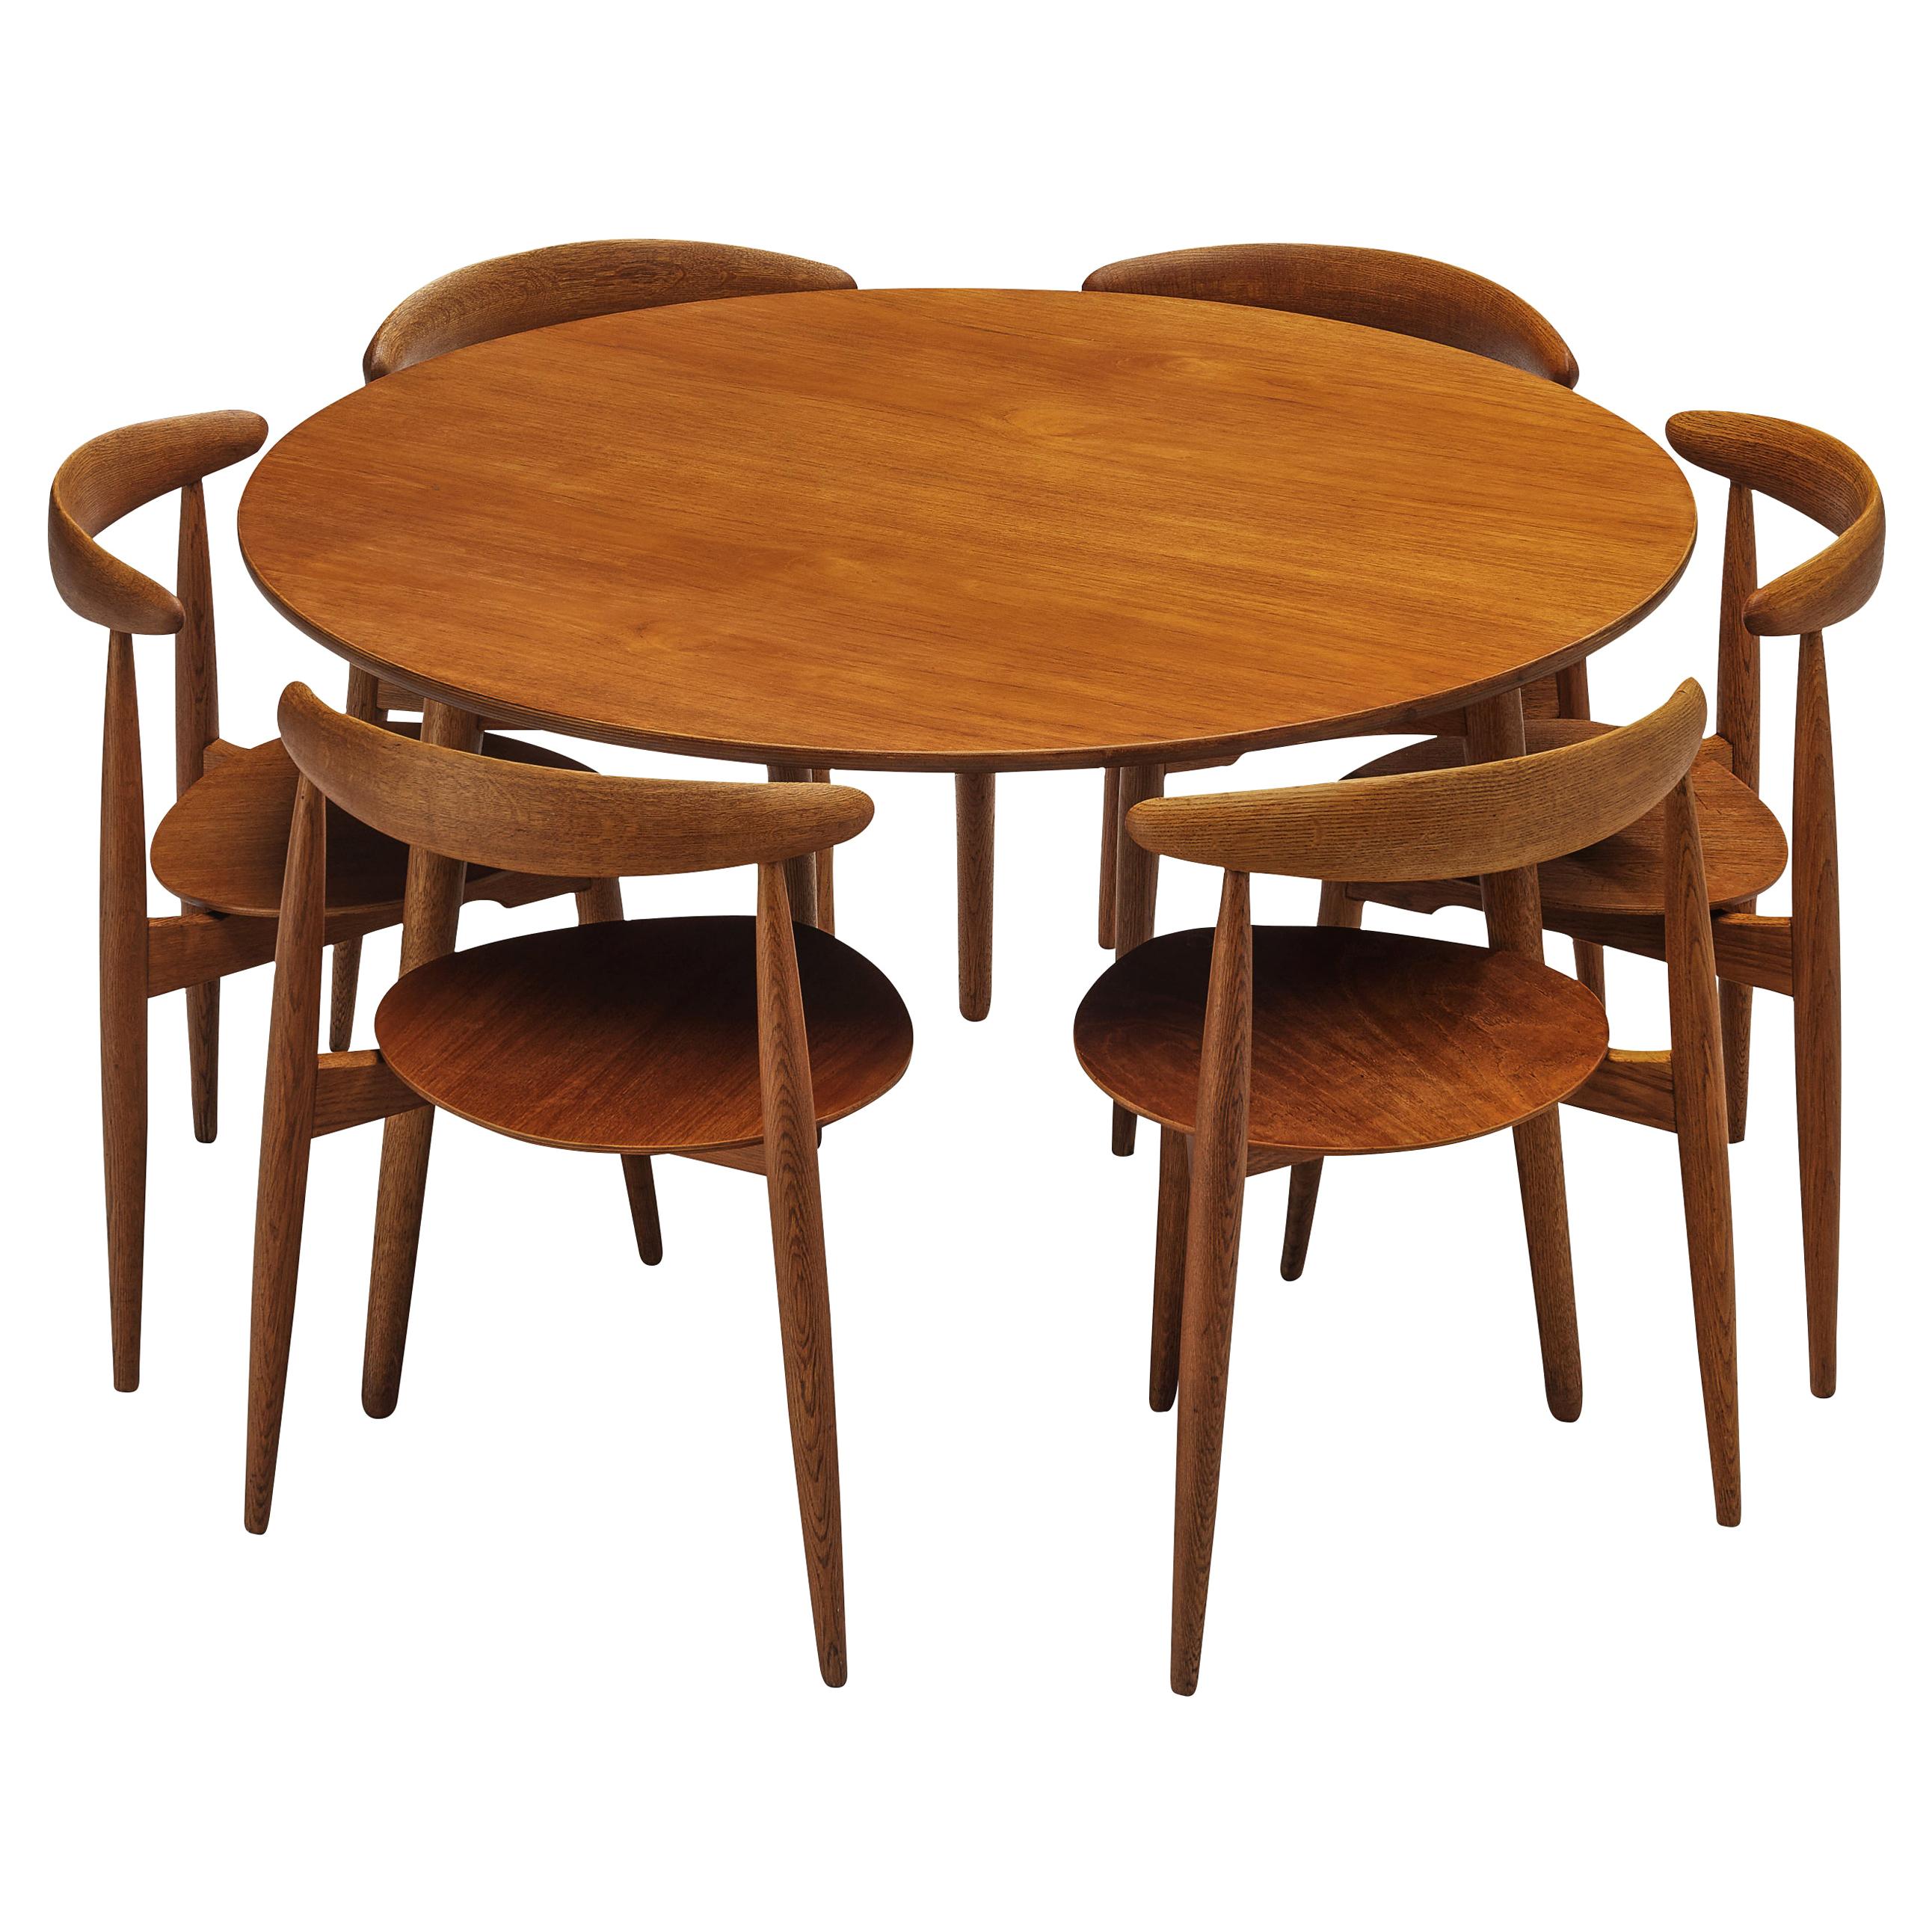 Hans J. Wegner for Fritz Hansen Set of 6 Chairs ‘FH4103’ with Round Dining Table